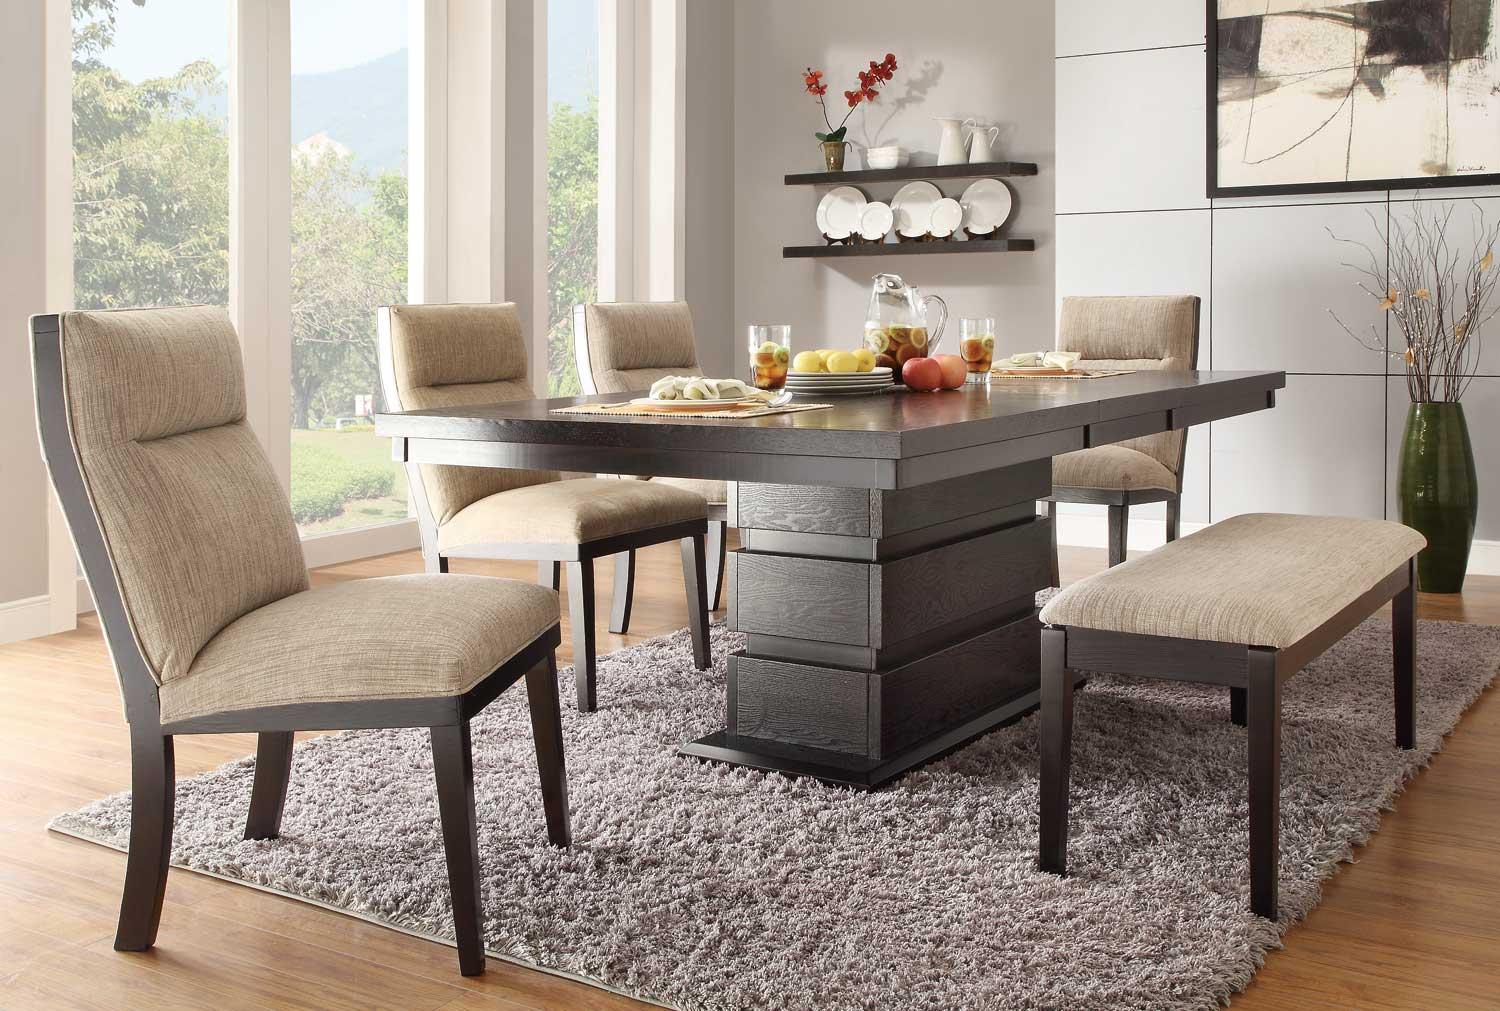 Contemporary, Modern Dining Table Set Tanager 2549-78+2549S+2549-13-Tanager in Beige, Espresso Fabric